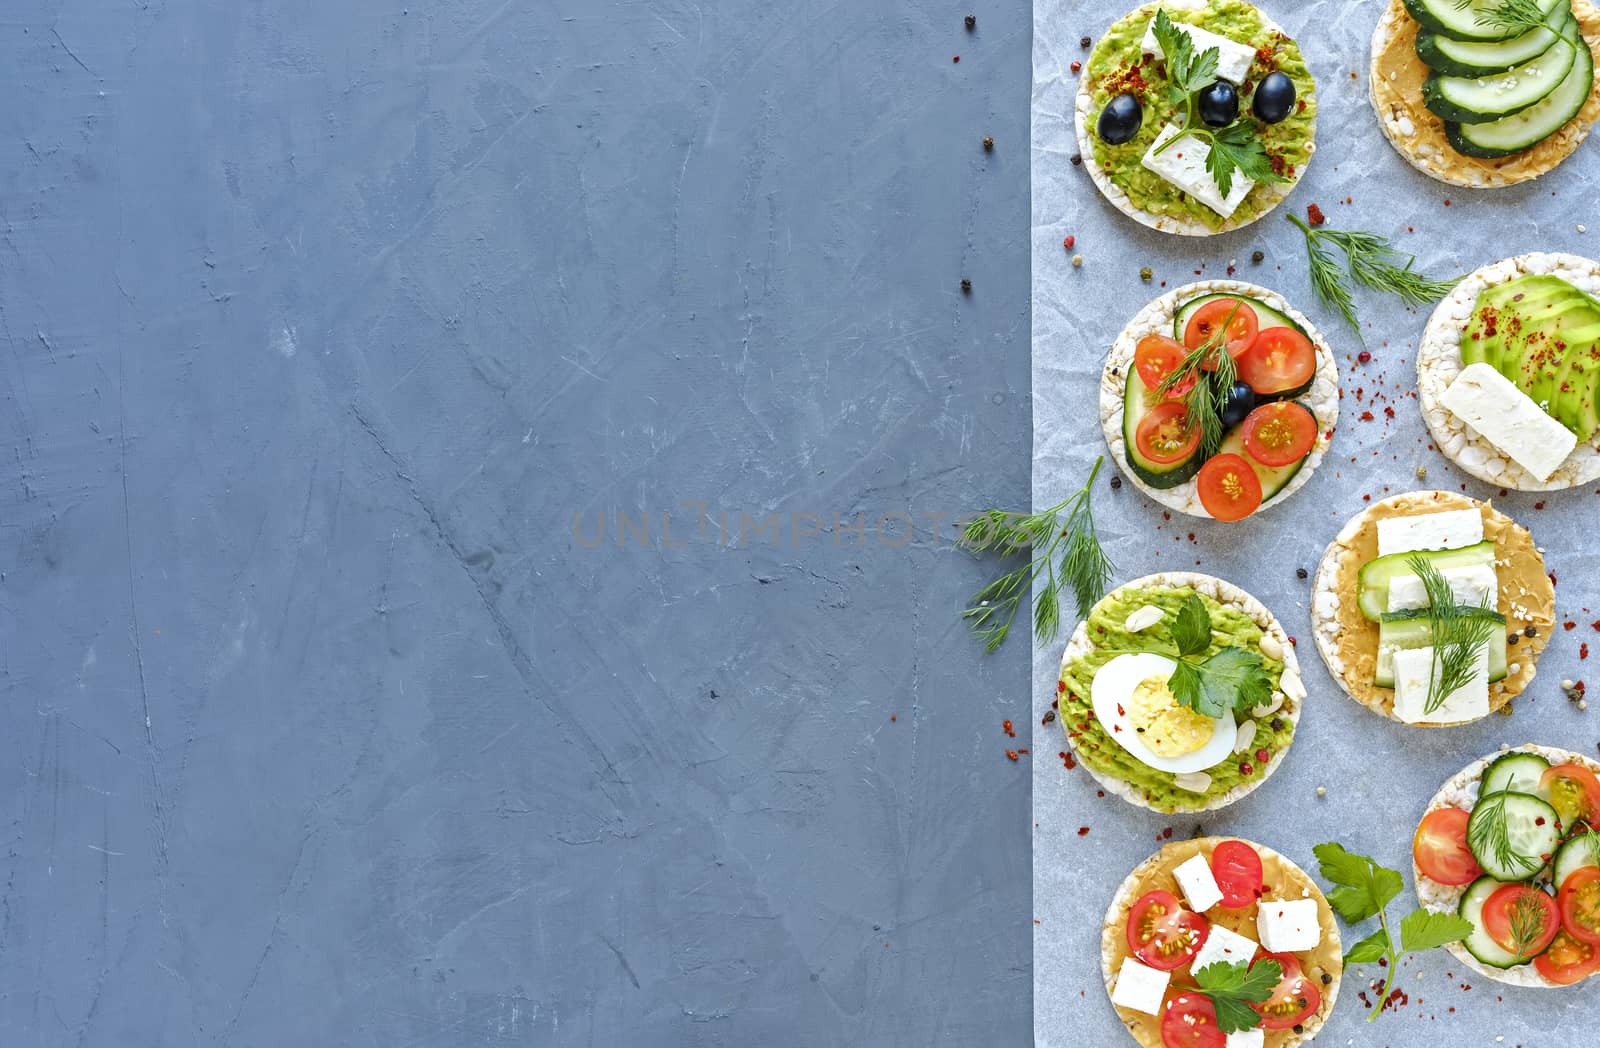 Selection of savory appetizers with fresh vegetables, cheese and herbs arranged as a border on a blue background with copy space